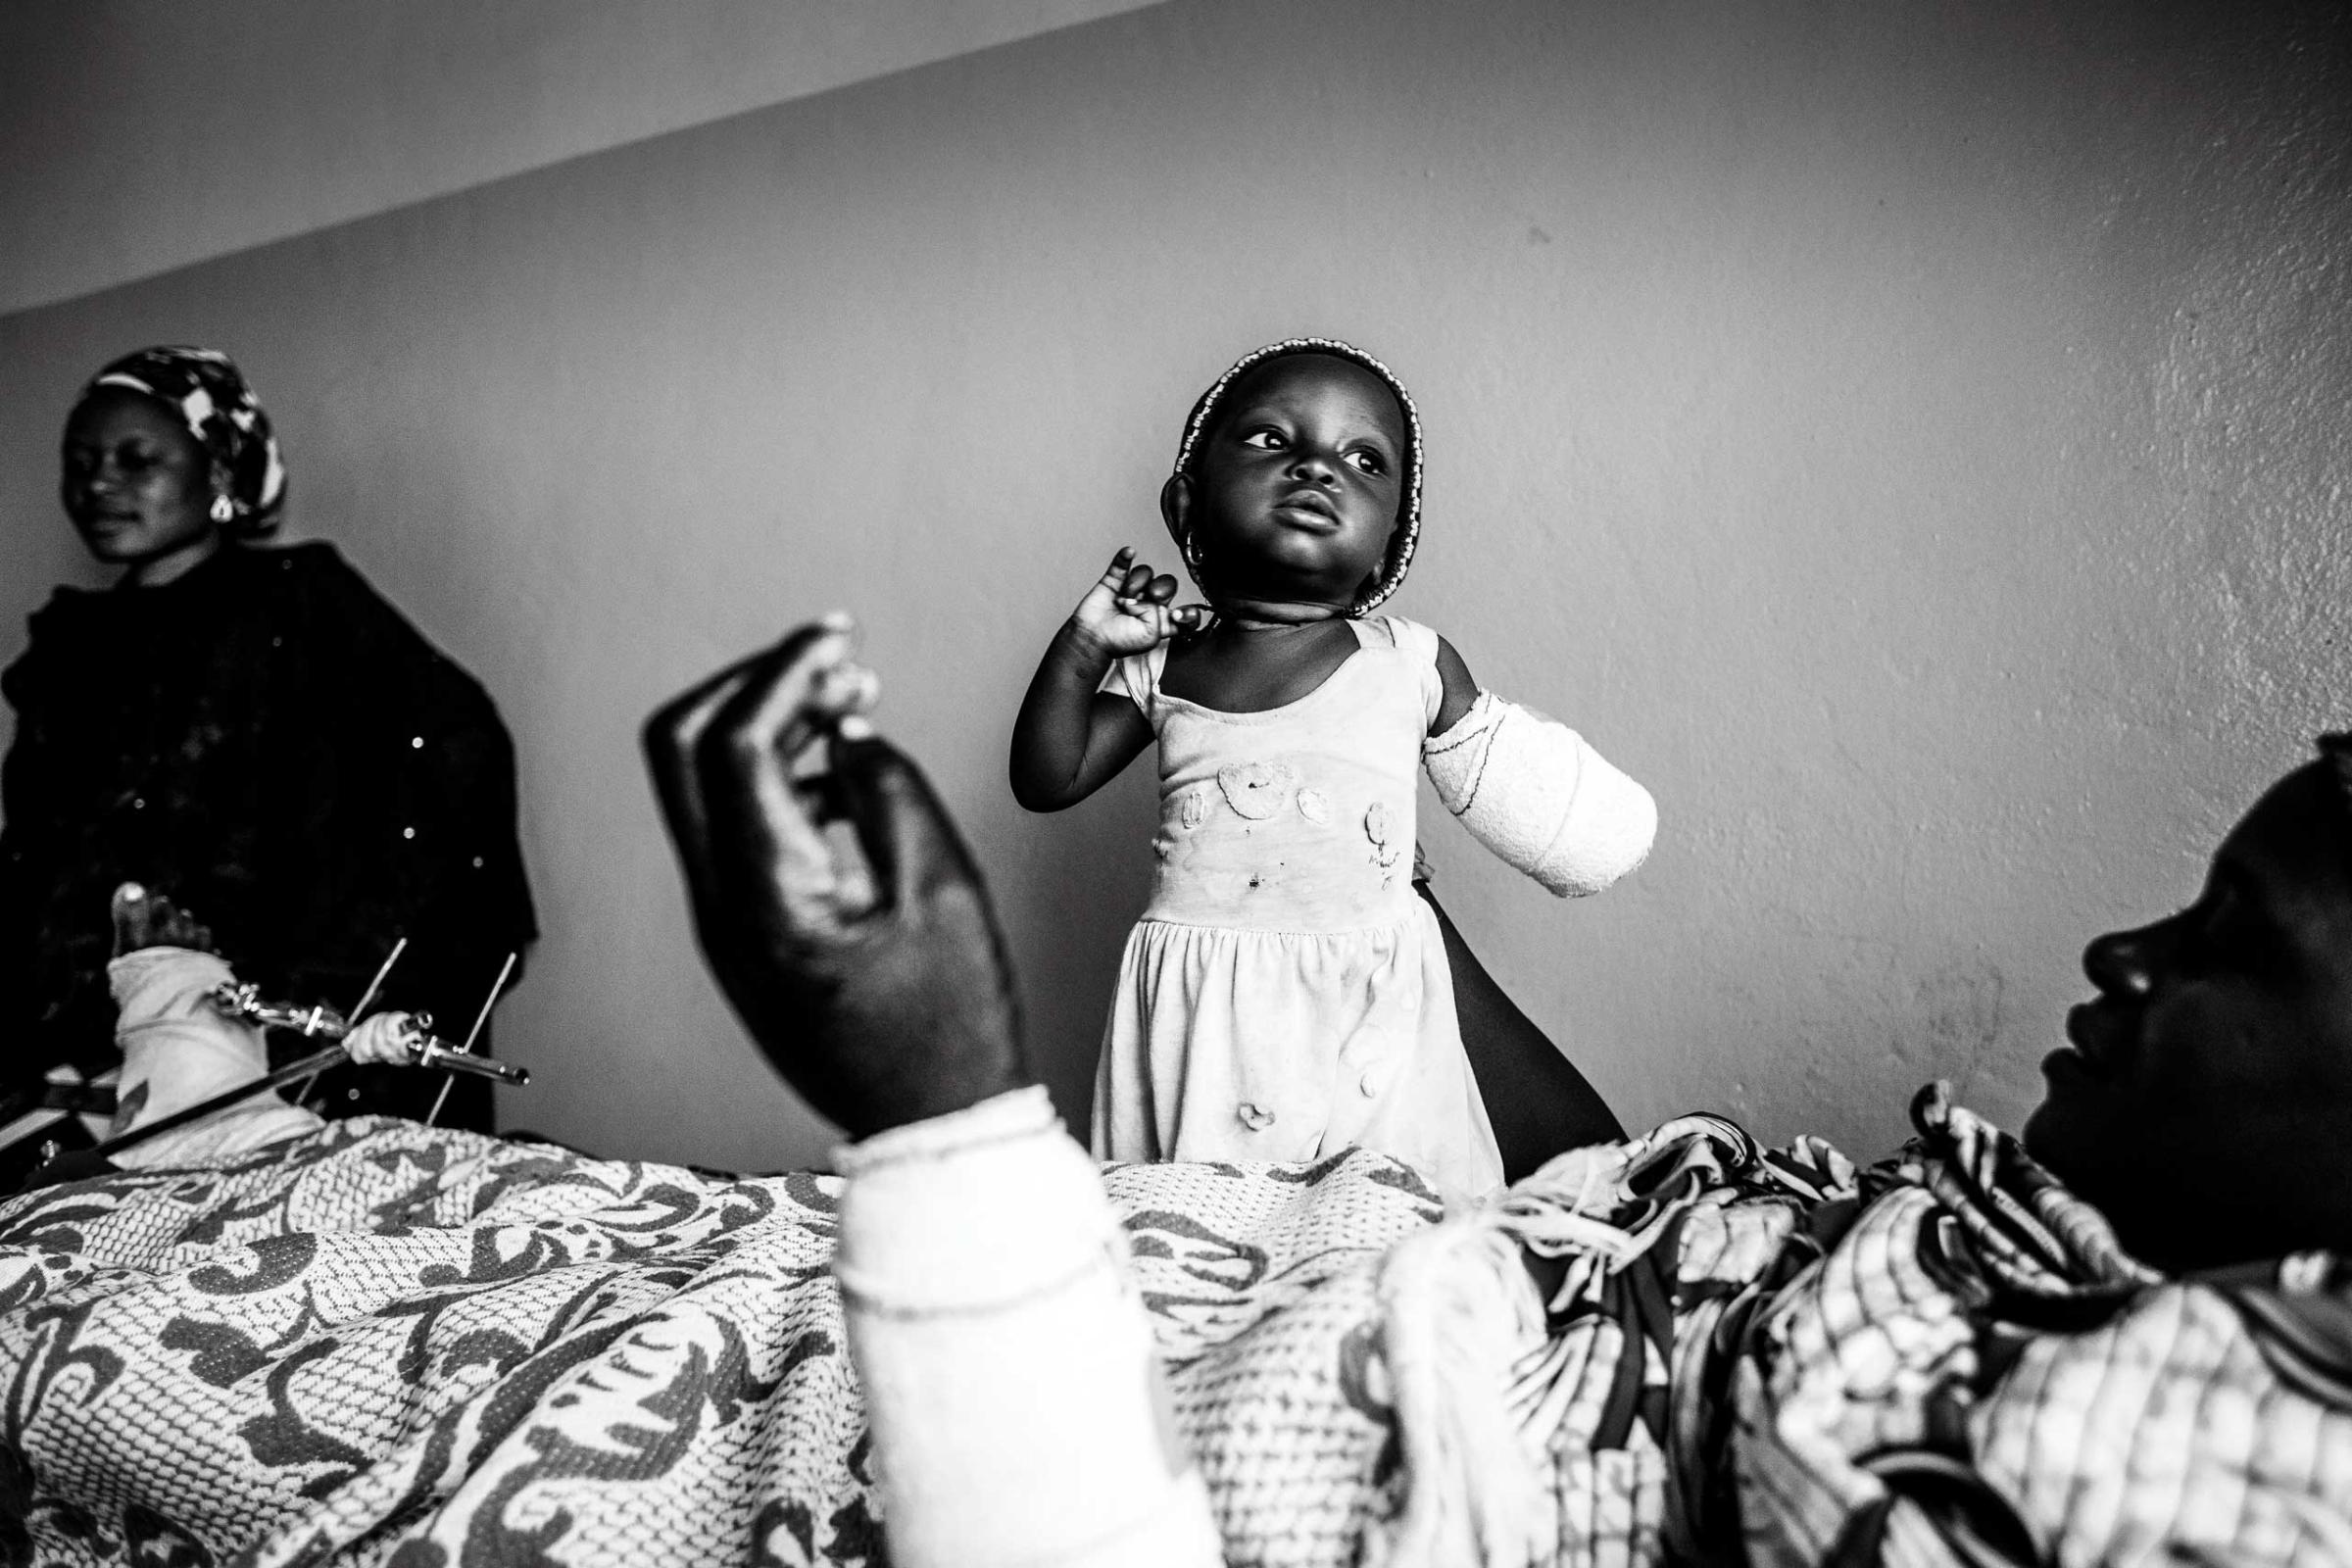 The Washington Post In Sight: The enemy within: A closer look at survivors of Boko Haram attacks across Northern NigeriaEight month old Afiniki lost her left arm in a Boko Haram attack on the Christian village of Chakawa in Jos, Nigeria, Jan. 2014.